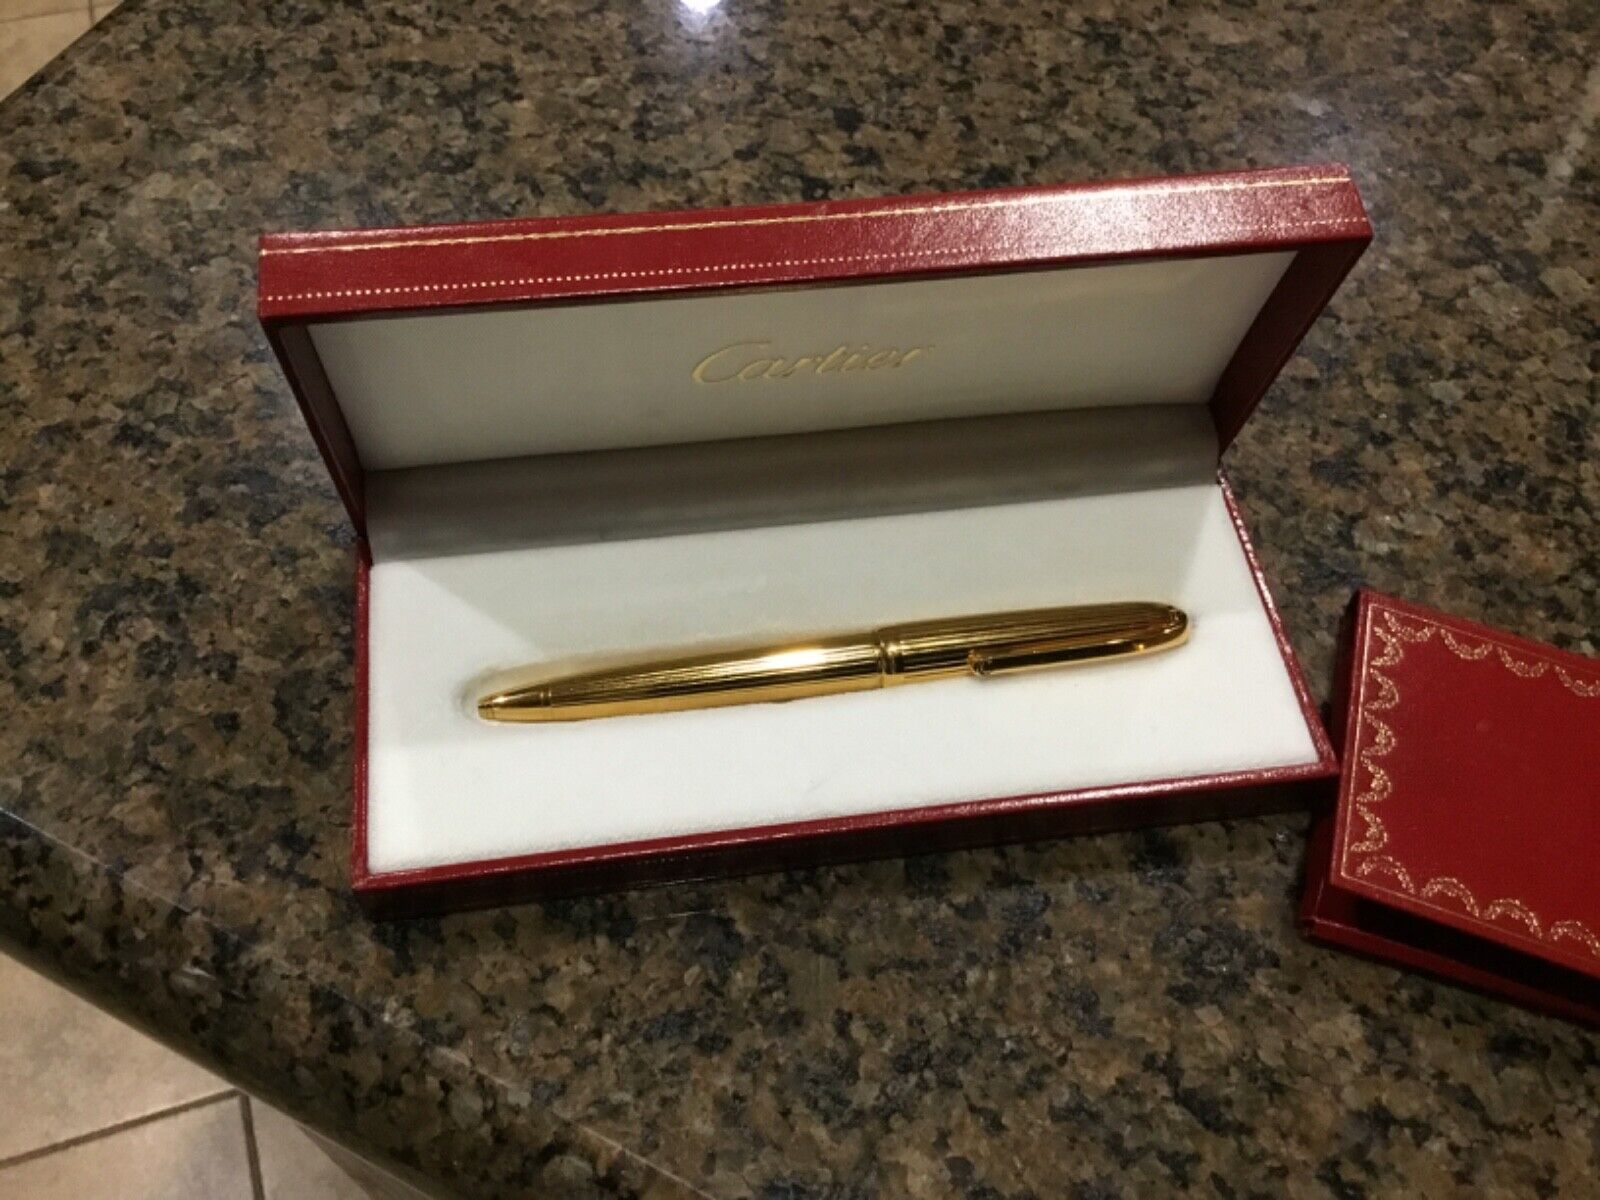 Authentic Rare GOLD PLATED STYLO Louis Cartier Godron Gold-Plated Ballpoint Pen